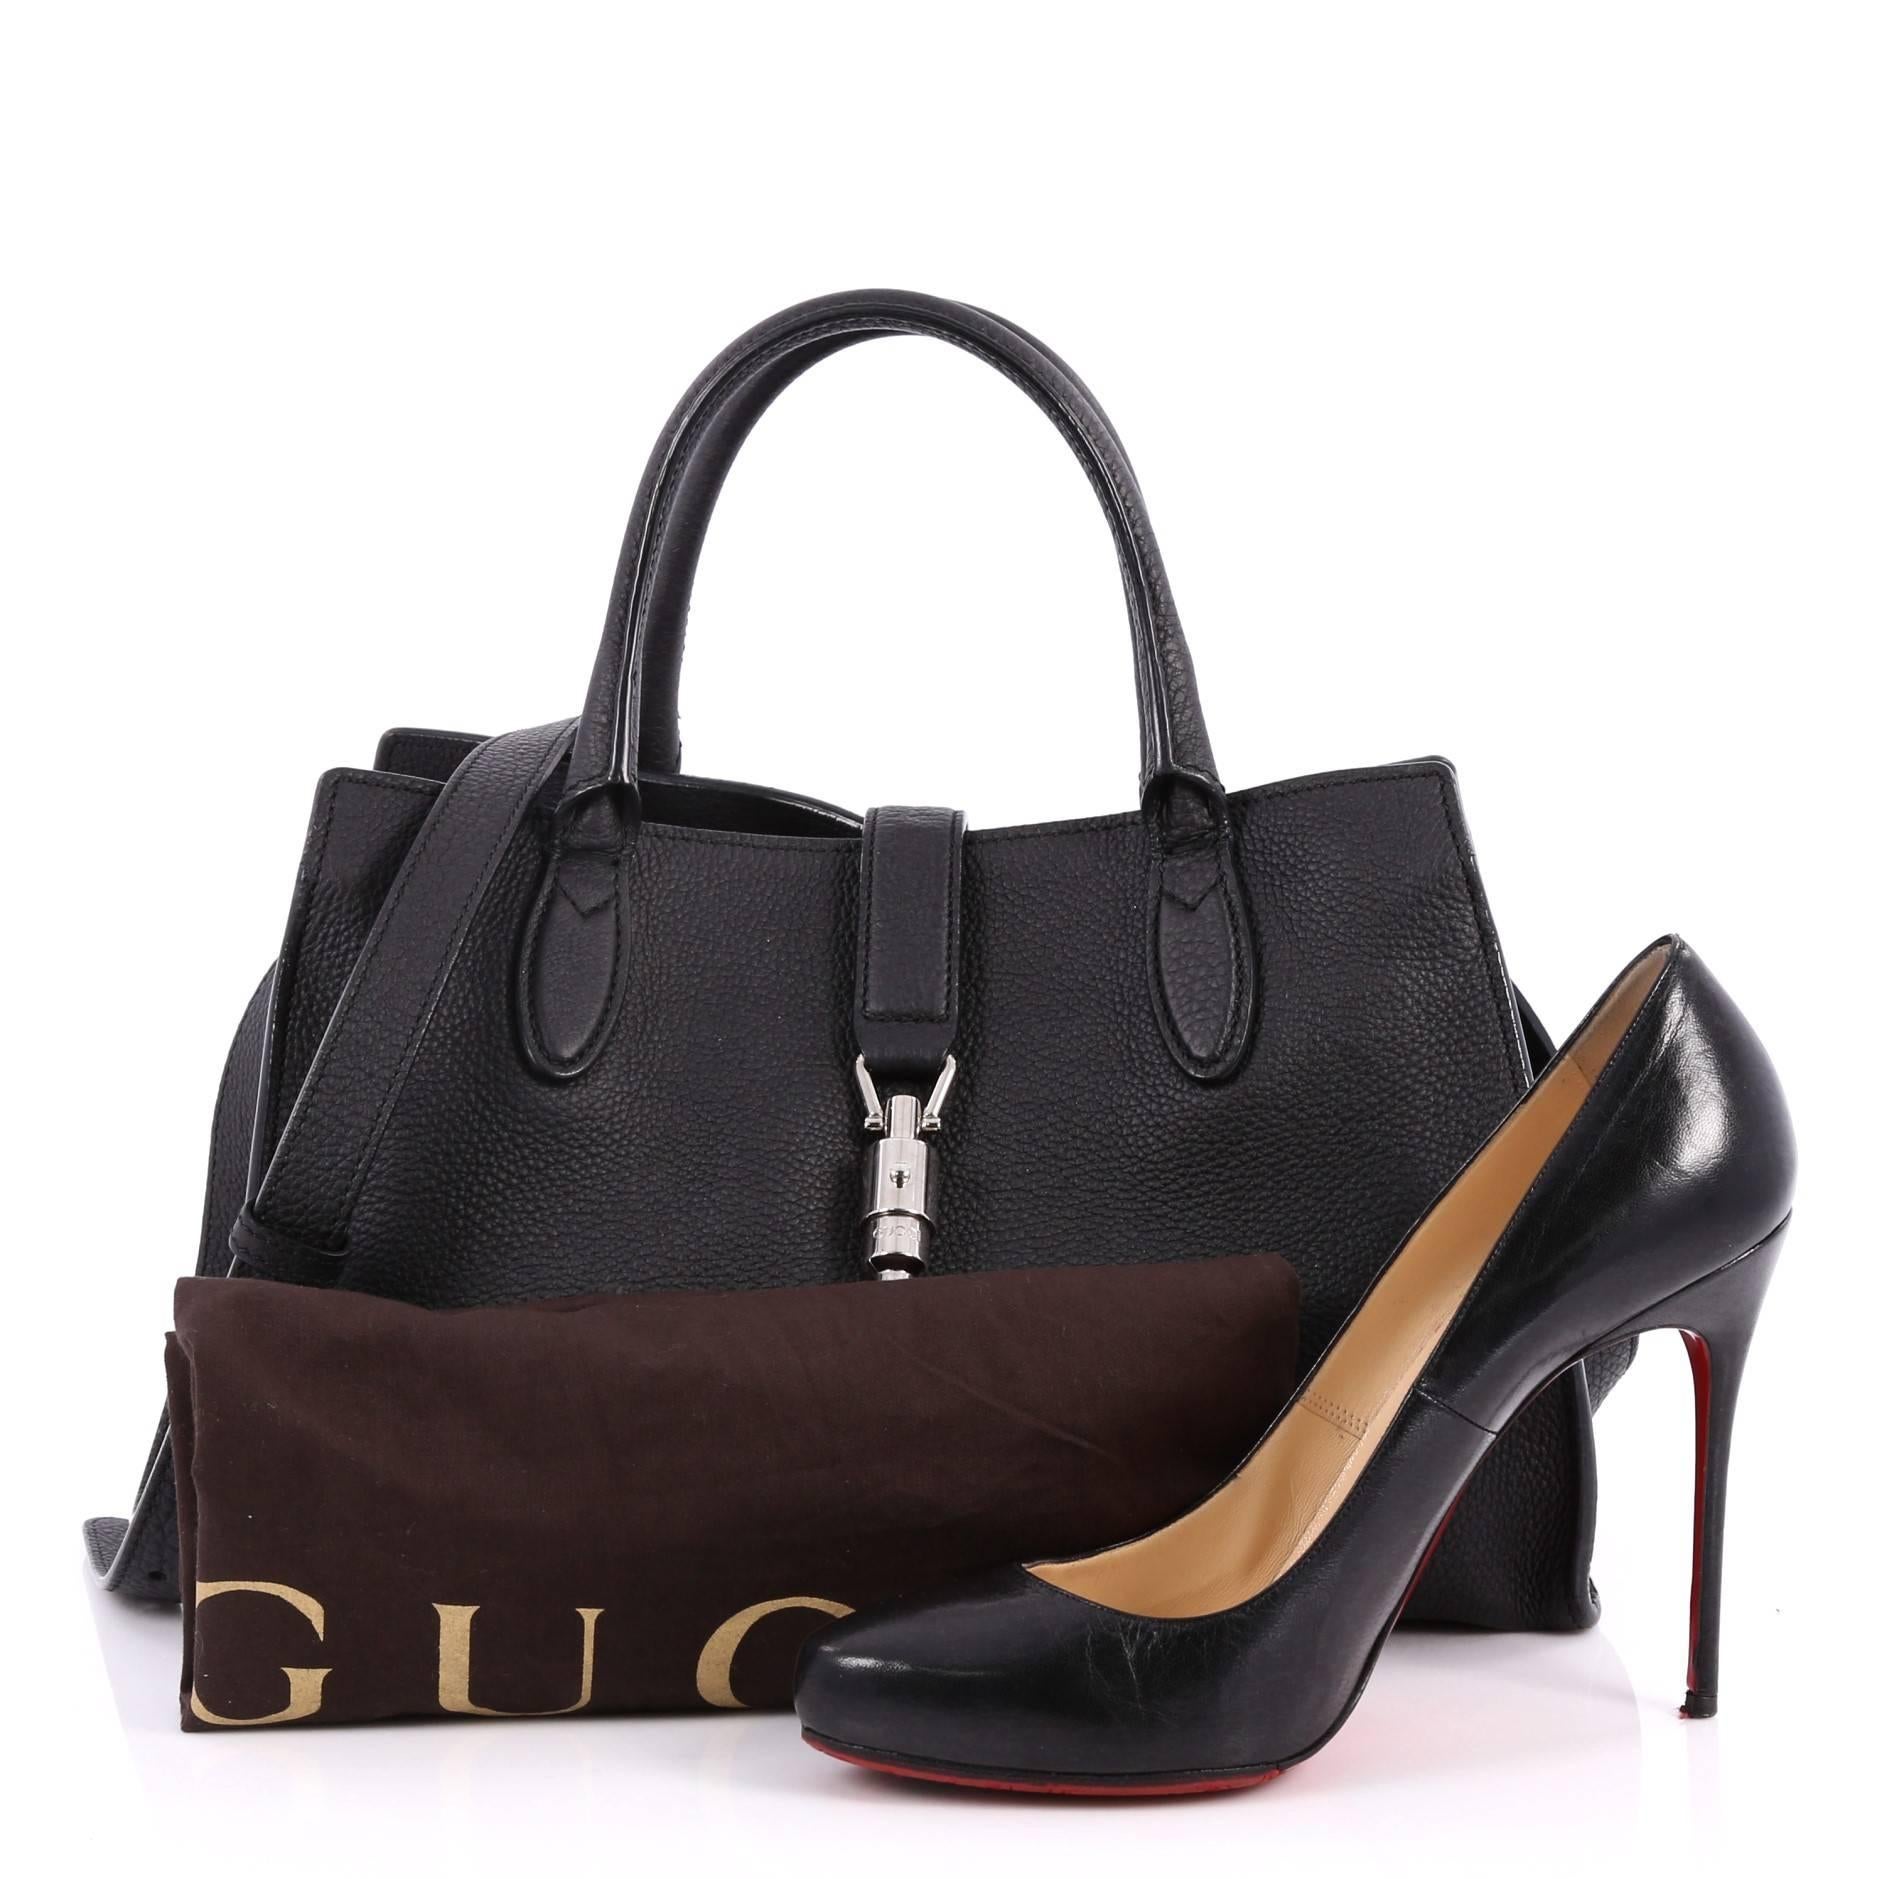 This authentic Gucci Jackie Soft Tote Leather Small is a must-have tote fit for the modern woman. Constructed from black leather, this iconic minimalist take on the iconic Jackie features a soft-structured silhouette, dual-rolled handles, and